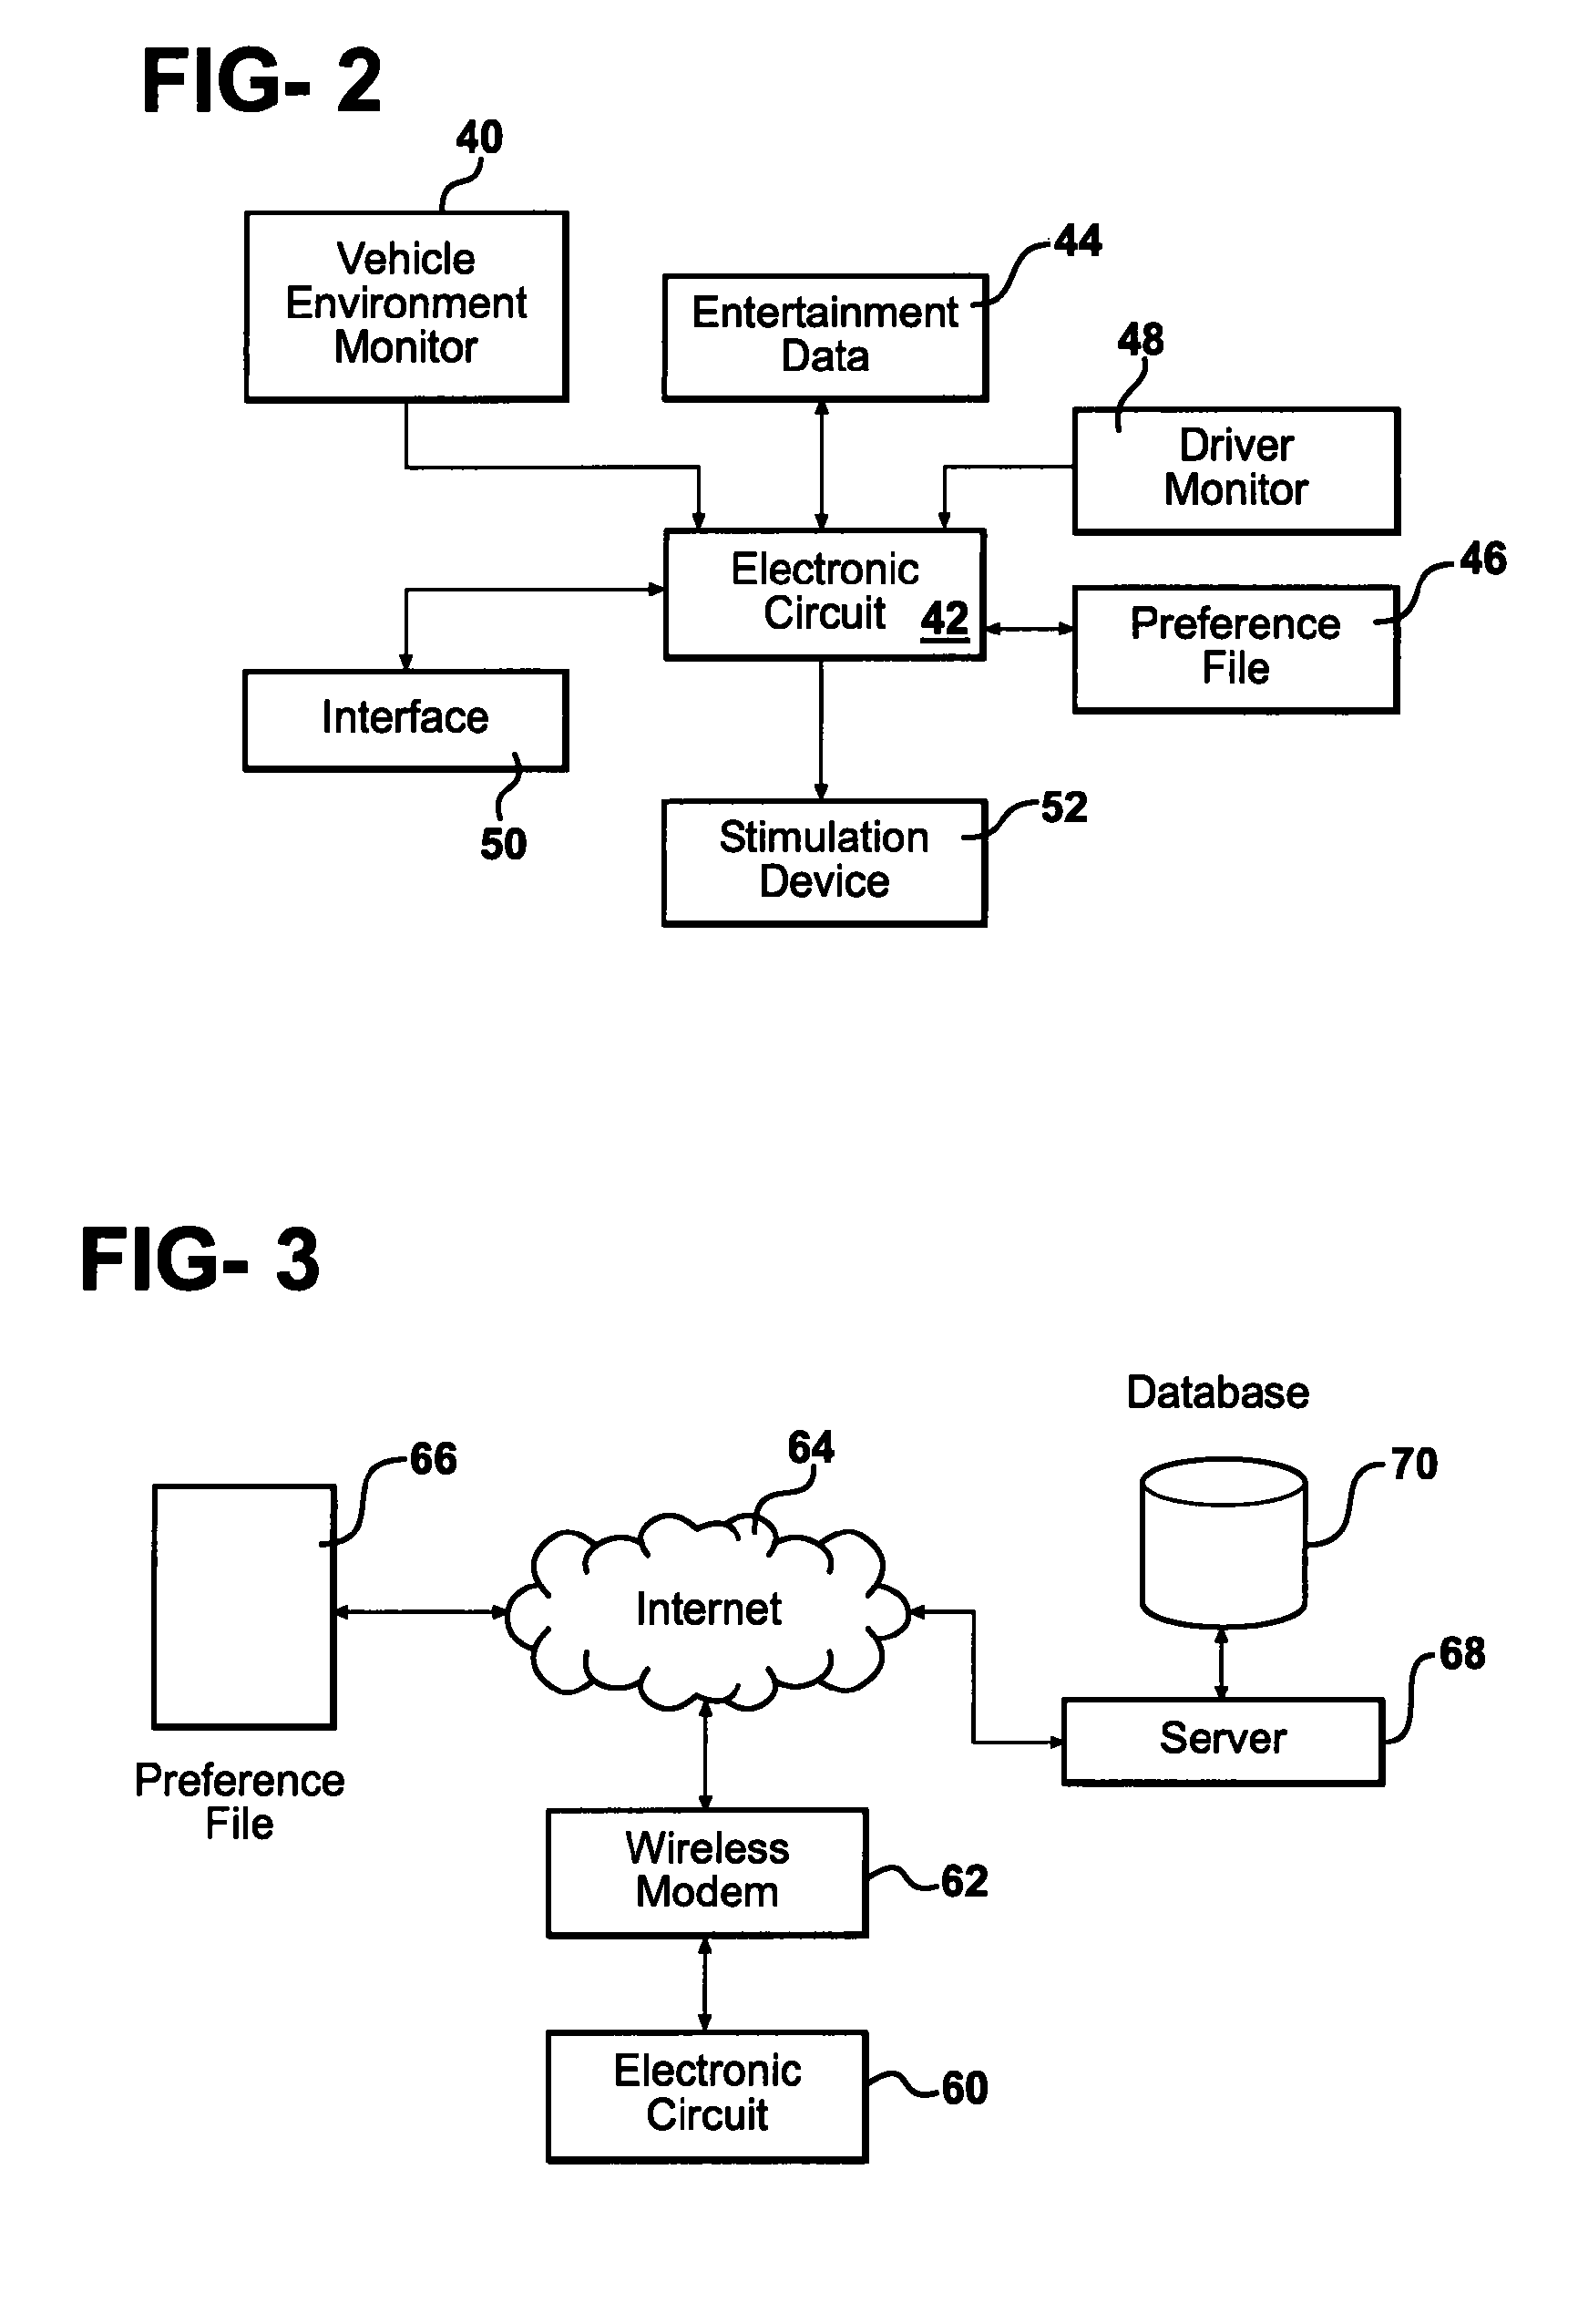 System and method for reducing boredom while driving